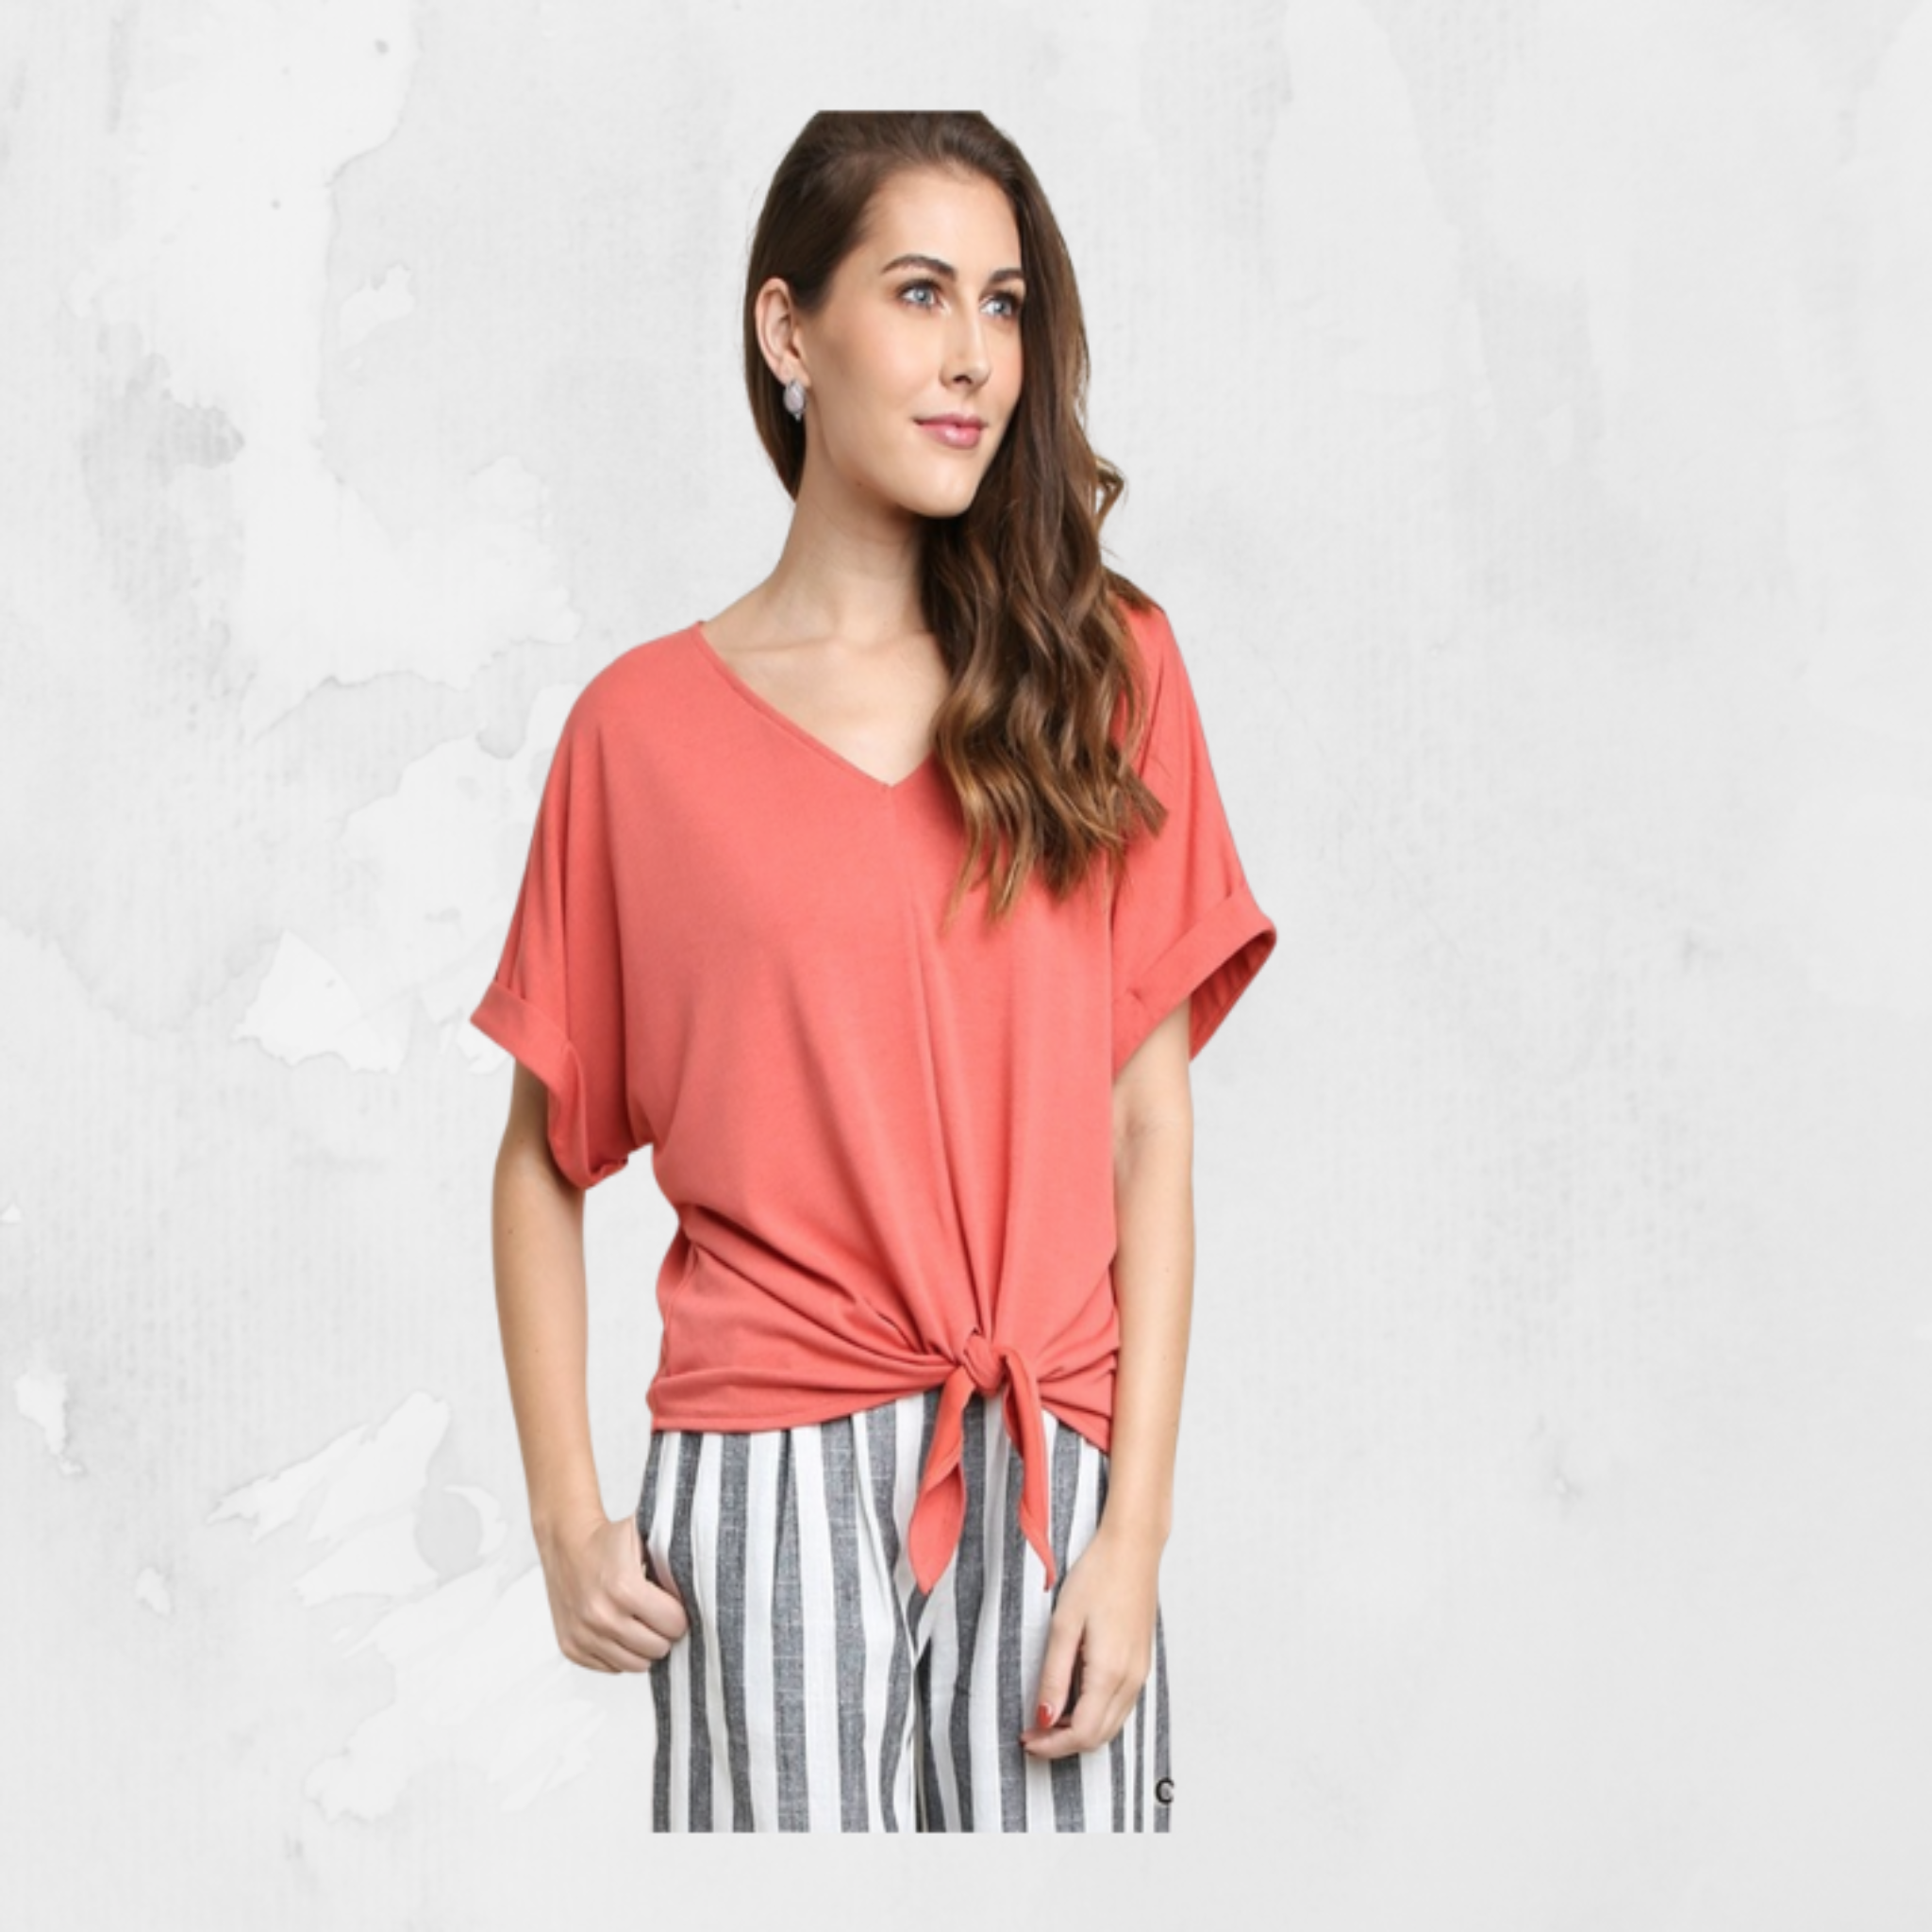 Rolled Short Sleeve V-Neck Top with Center Waist Tie  by Umgee